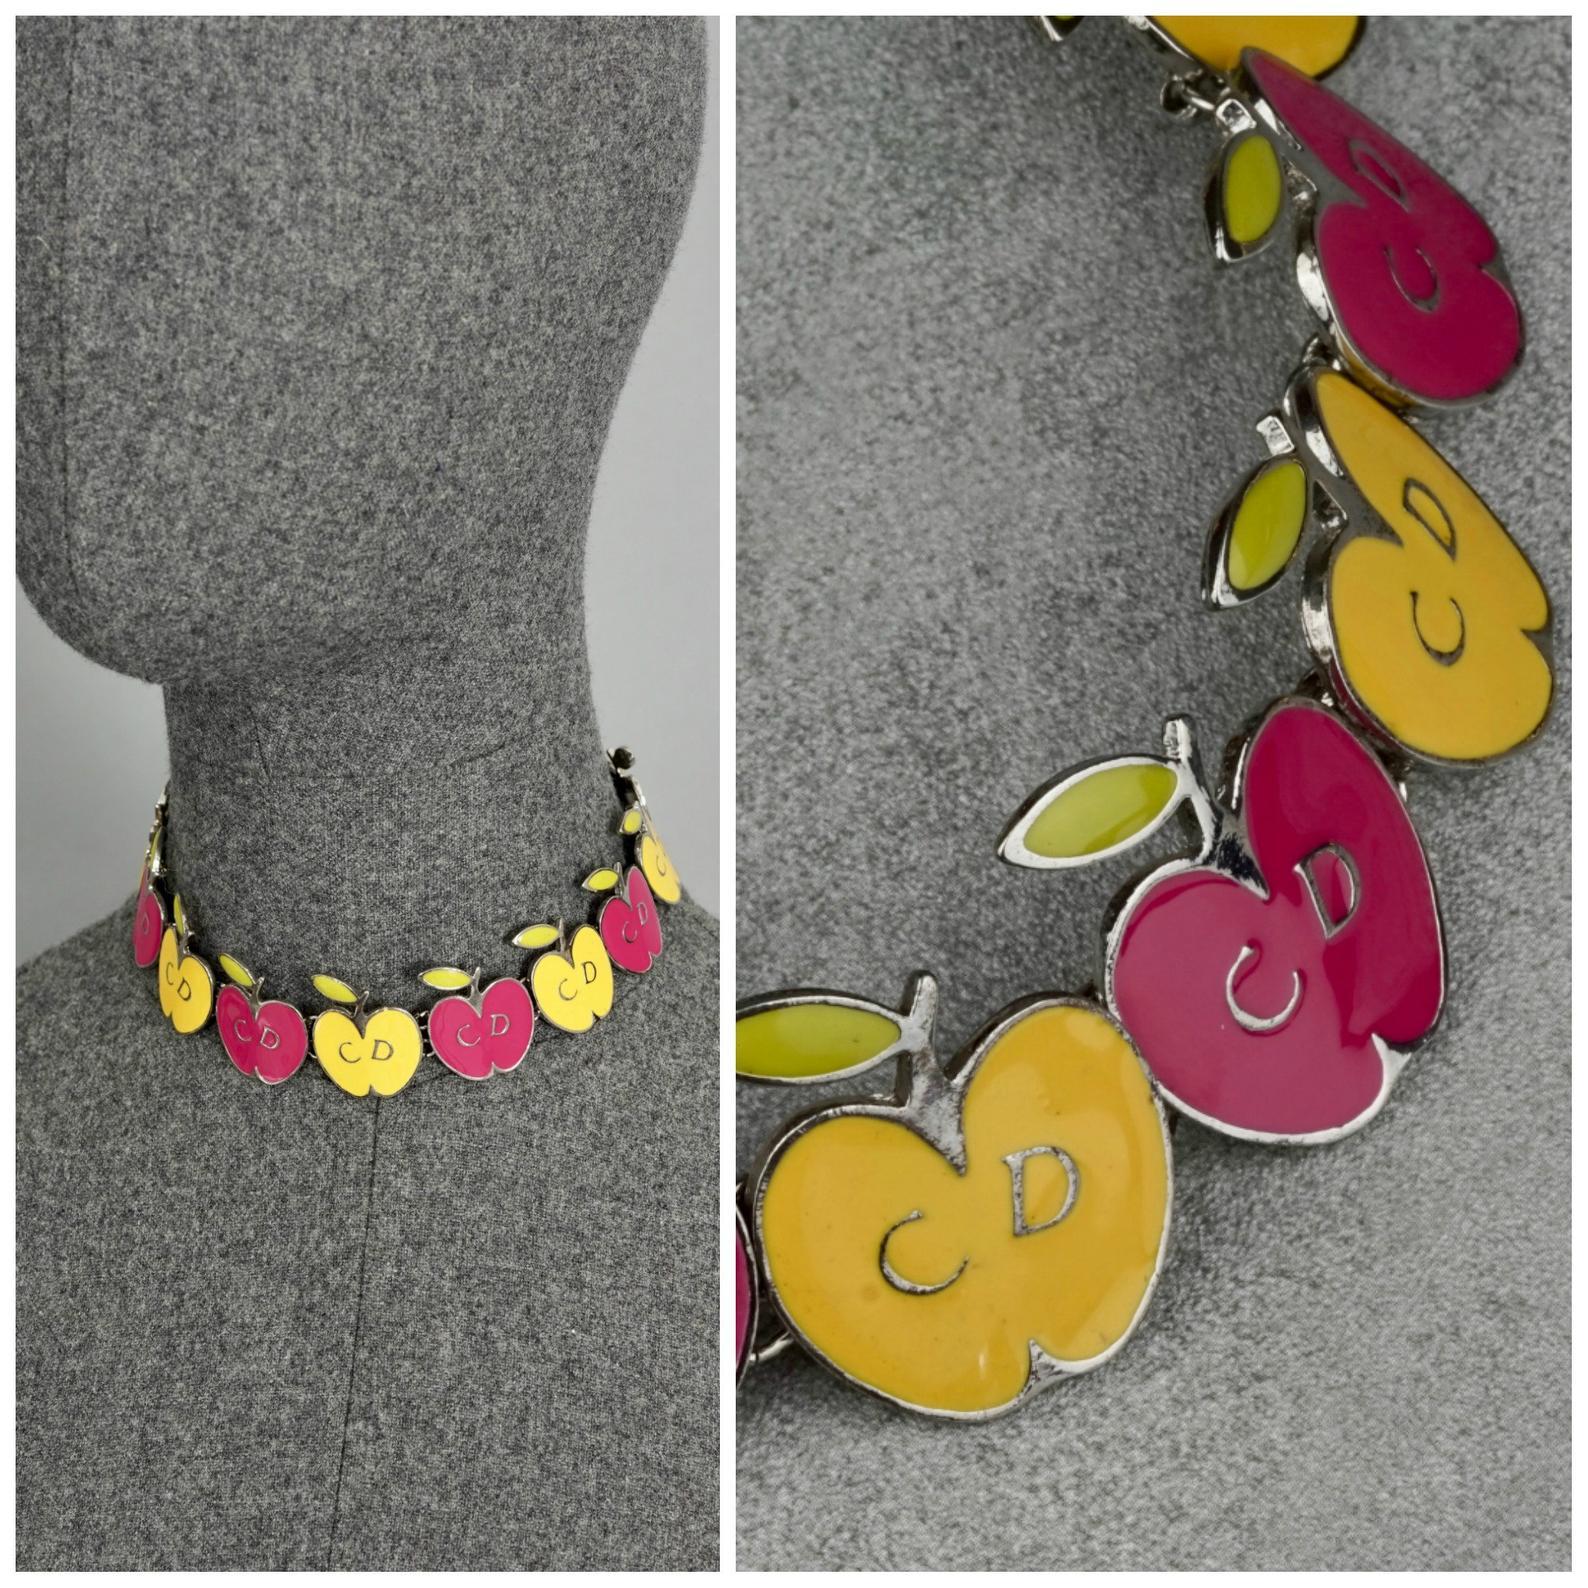 Vintage CHRISTIAN DIOR Logo Pop Enamel Apple Necklace

Measurements:
Height: 1.26 inches (3.2 cm)
Wearable Length: 12.79 inches to 14.56 inches (32.5 cm to 37 cm)

Features:
- 100% Authentic CHRISTIAN DIOR.
- Pop colour enamelled apples in pink,